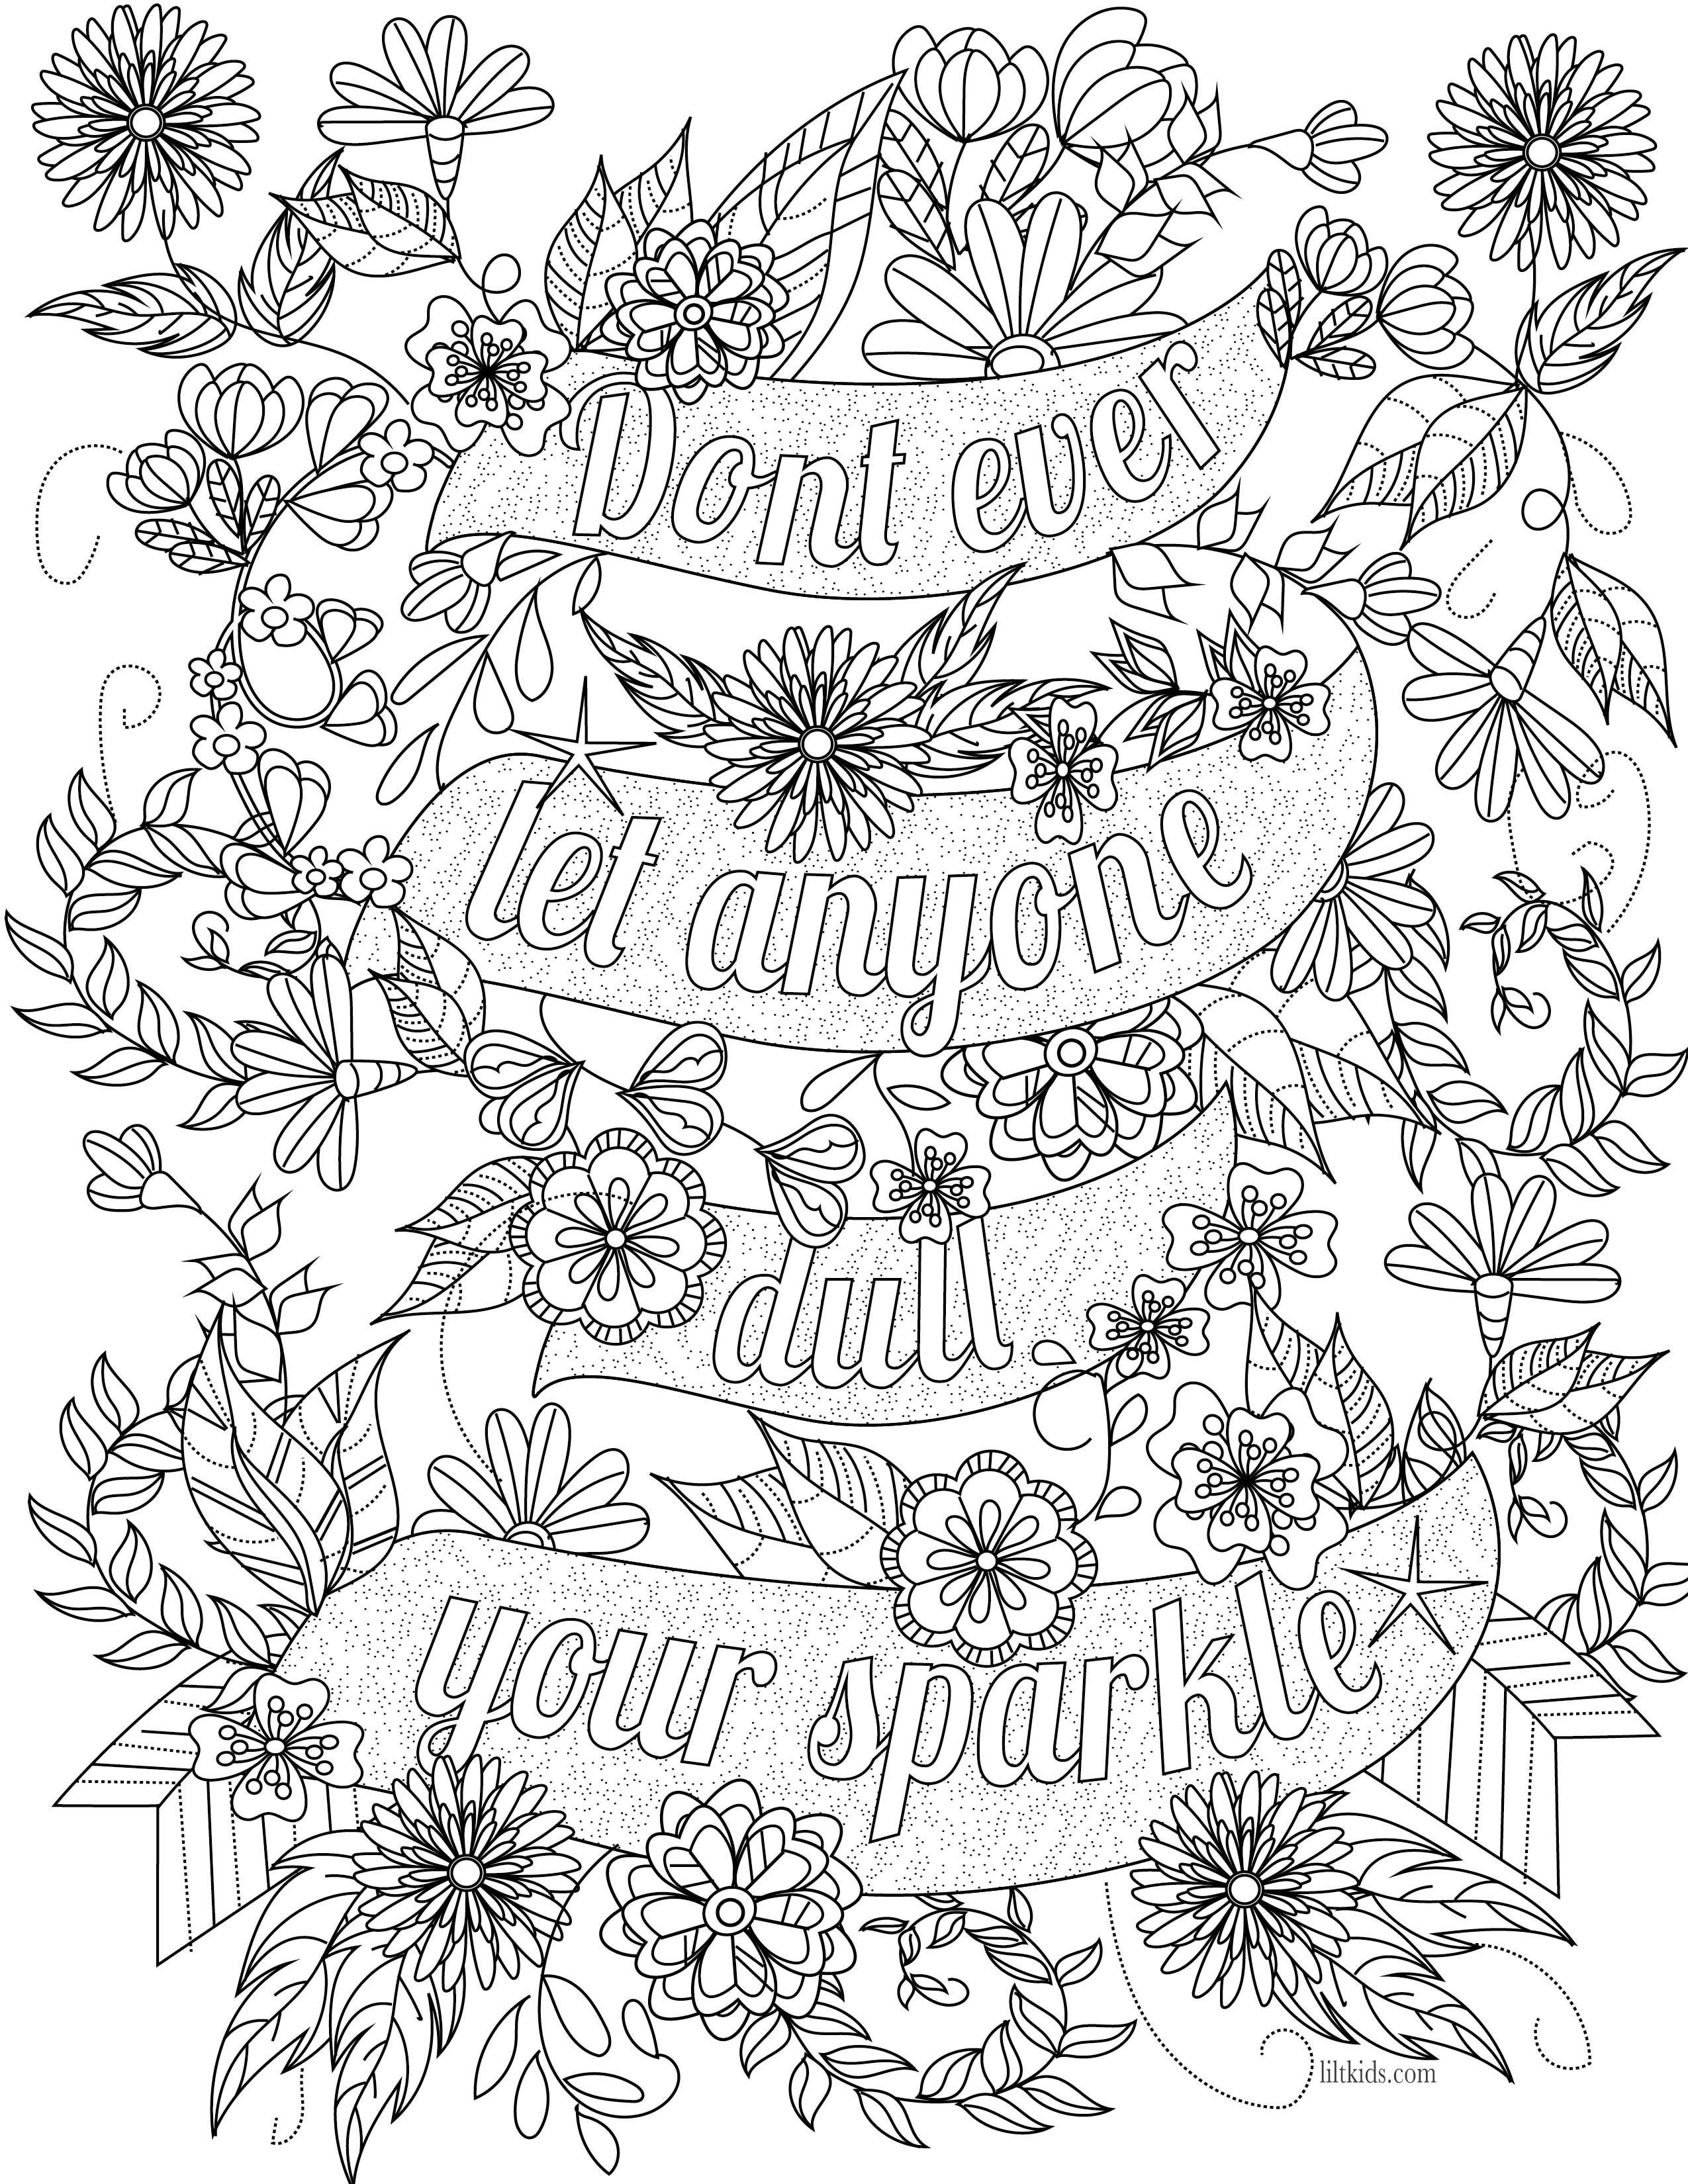 55+ Adult Coloring Pages Finished to Perfection - #7 is Stunning 158